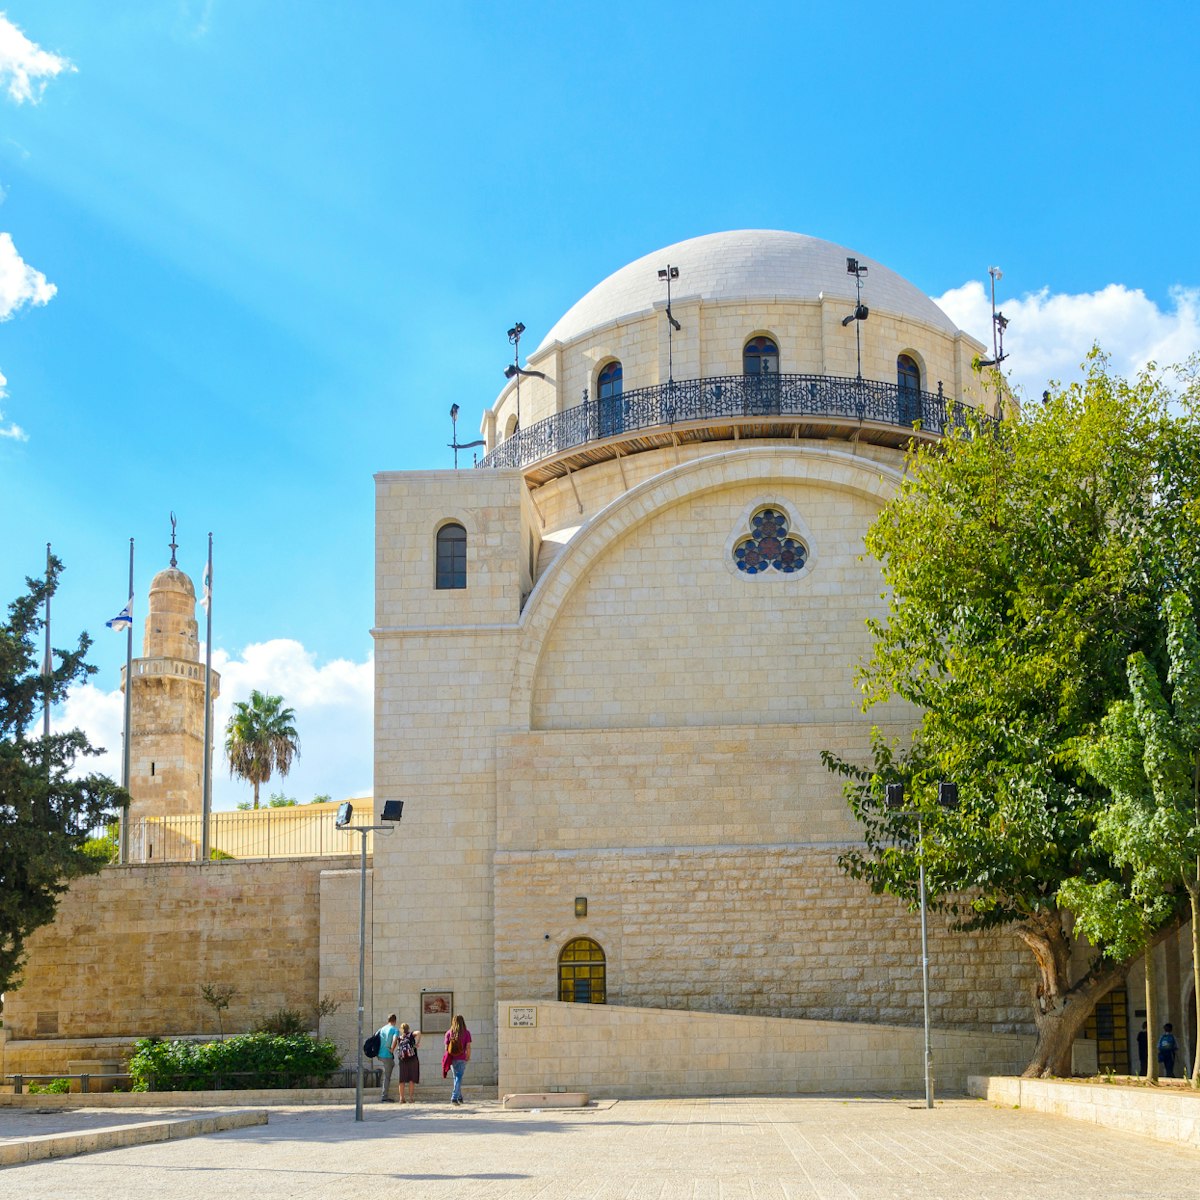 The Hurva Synagogue. Old city Jerusalem, Jewish quarter, Israel. It was first founded in the early 18th century and destroyed by the Arab Legion in 1948. It has been newly rebuilt in march 2000. ; Shutterstock ID 546798607; Your name (First / Last): Lauren Keith; GL account no.: 65050; Netsuite department name: Online Editorial; Full Product or Project name including edition: Israel Update 2017